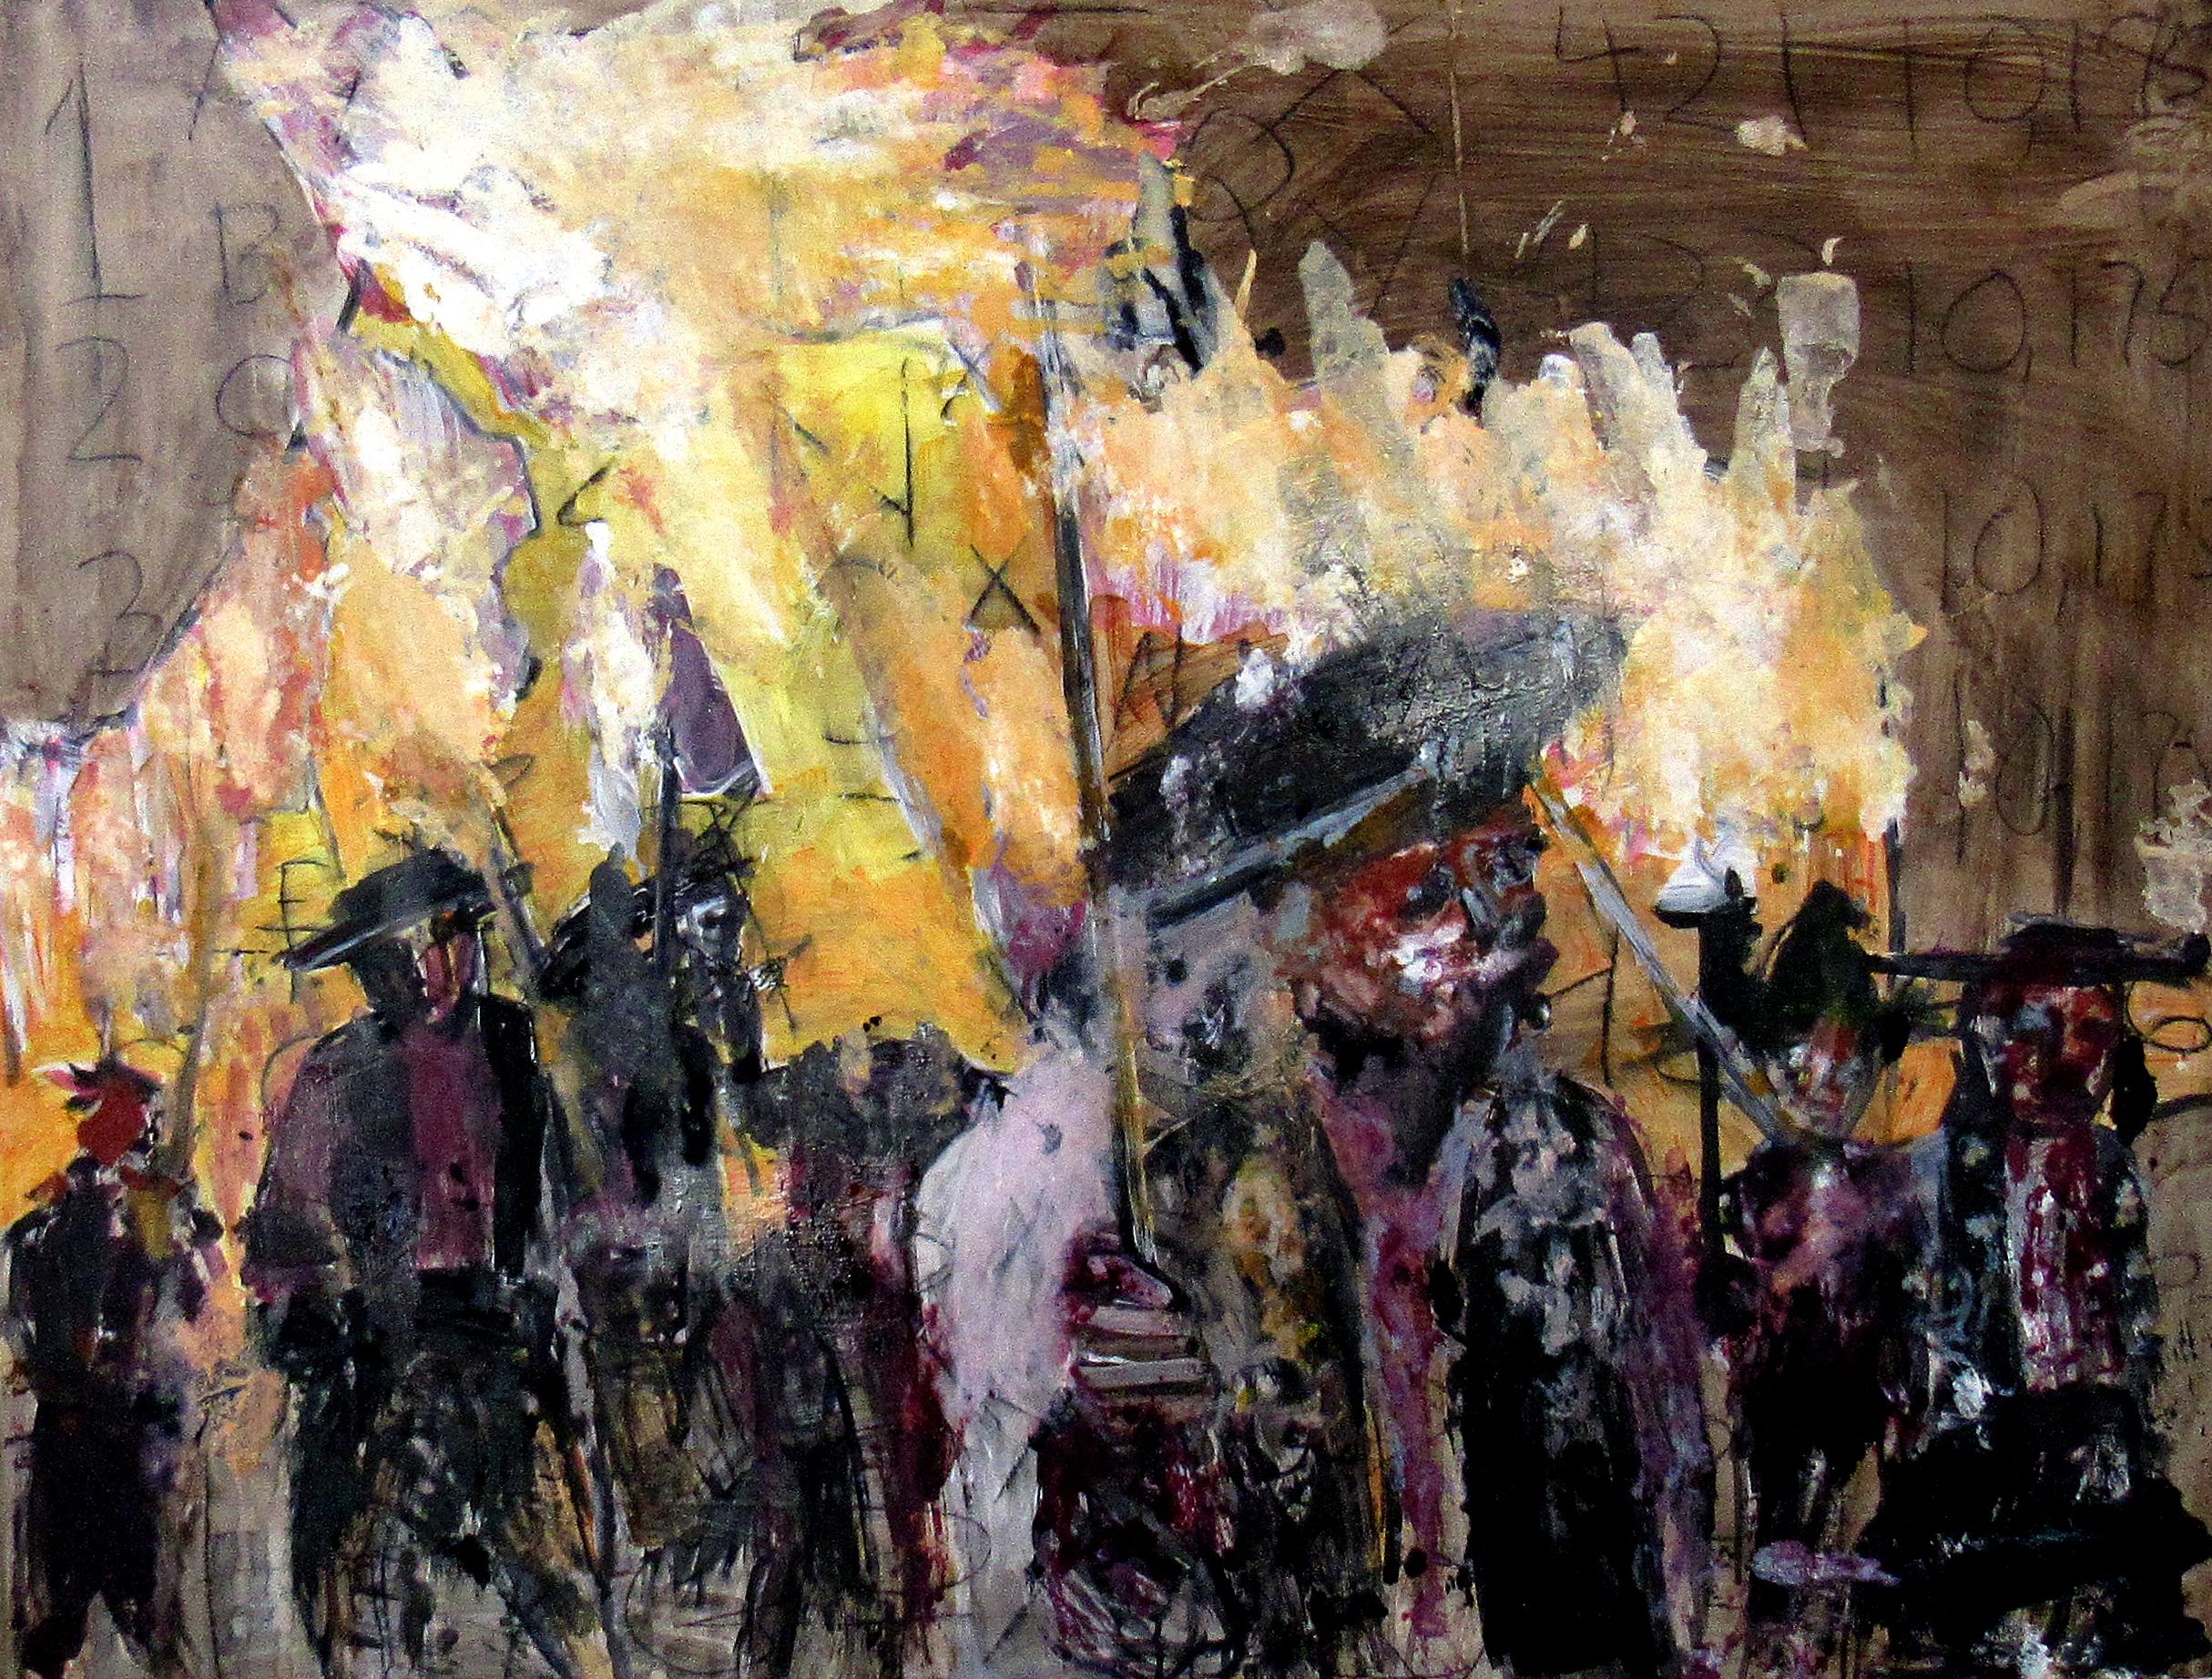 C. Dimitri Figurative Painting - Lot, dramatic abstracted military theme, fire, multiple figures